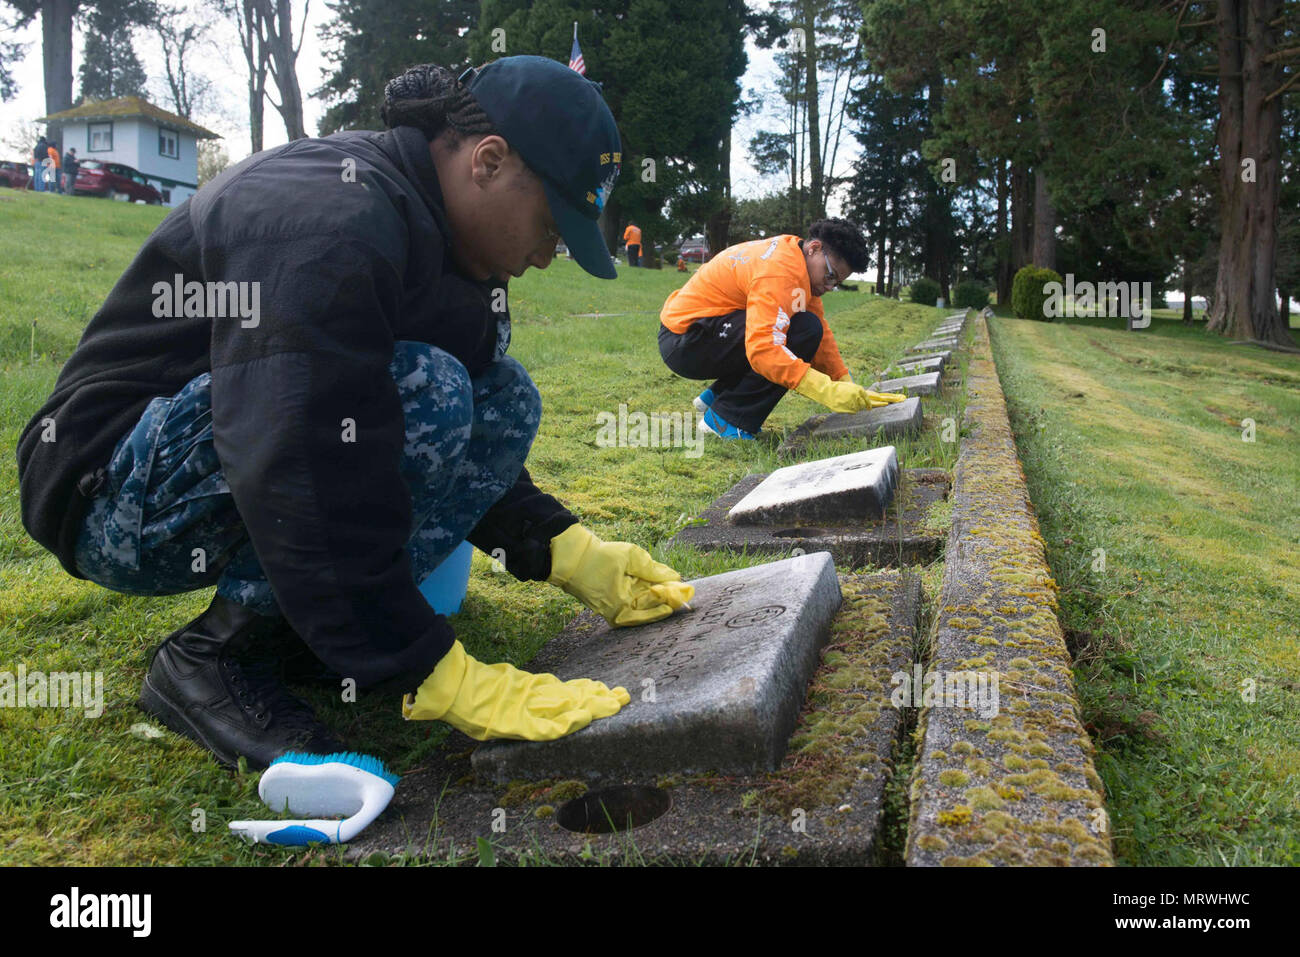 Washington (April 14, 2017) Logistics Specialist 2nd Class Jailyn Powell from Sylacauga, Alabama, and Culinary Specialist 2nd Class Jamillah Williams from Forest, Mississippi, both assigned to USS John C. Stennis (CVN 74), clean headstones at Ivy Green Cemetery during a community service event. John C. Stennis is conducting a planned incremental availability (PIA) at Puget Sound Naval Shipyard and Intermediate Maintenance Facility, during which the ship is undergoing scheduled maintenance and upgrades. Stock Photo